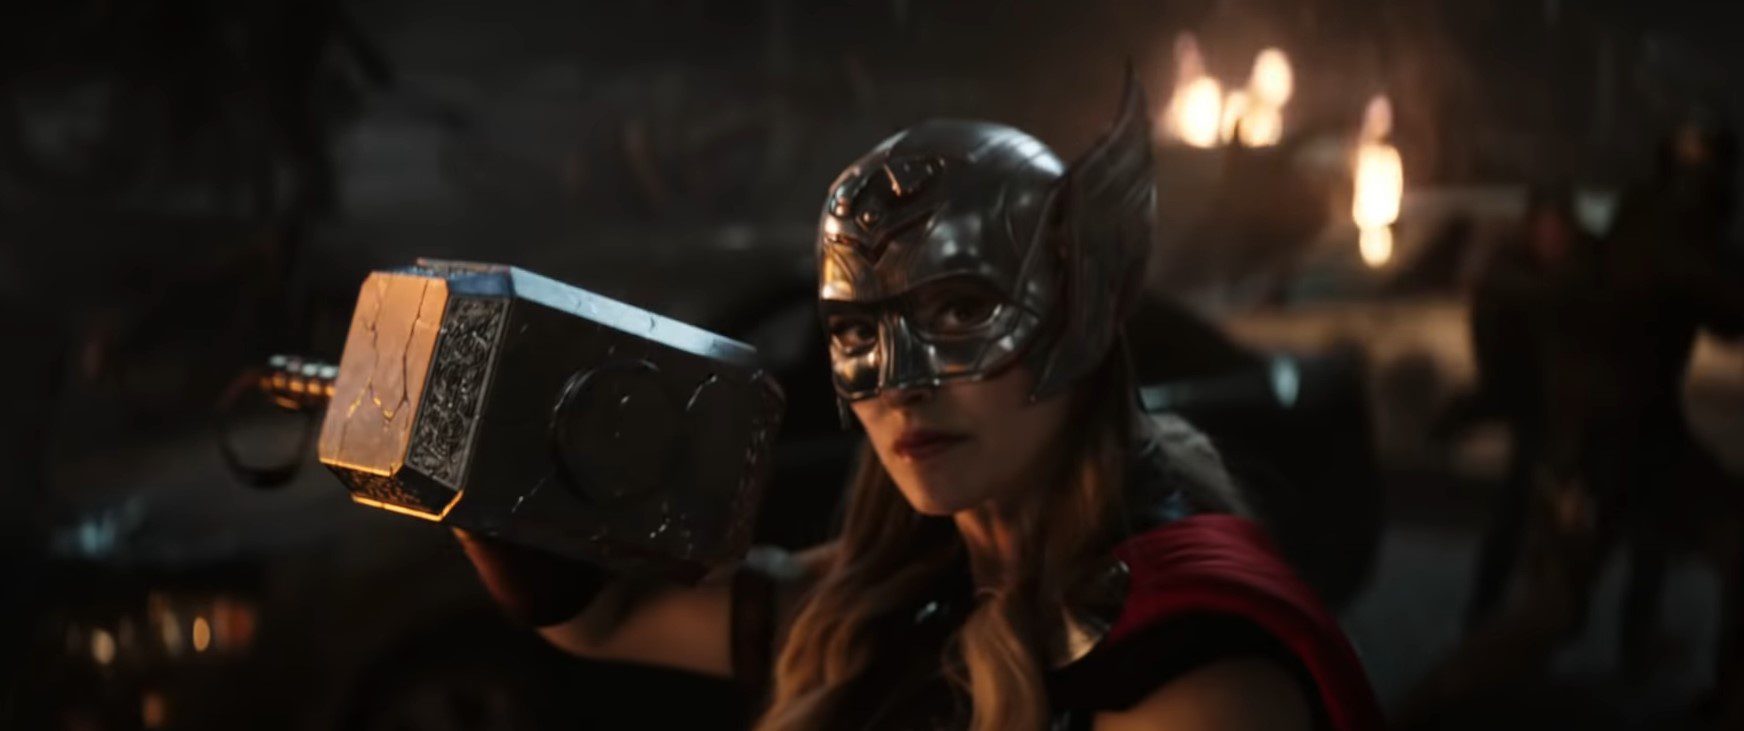 Is Beta Ray Bill In Thor Love and Thunder